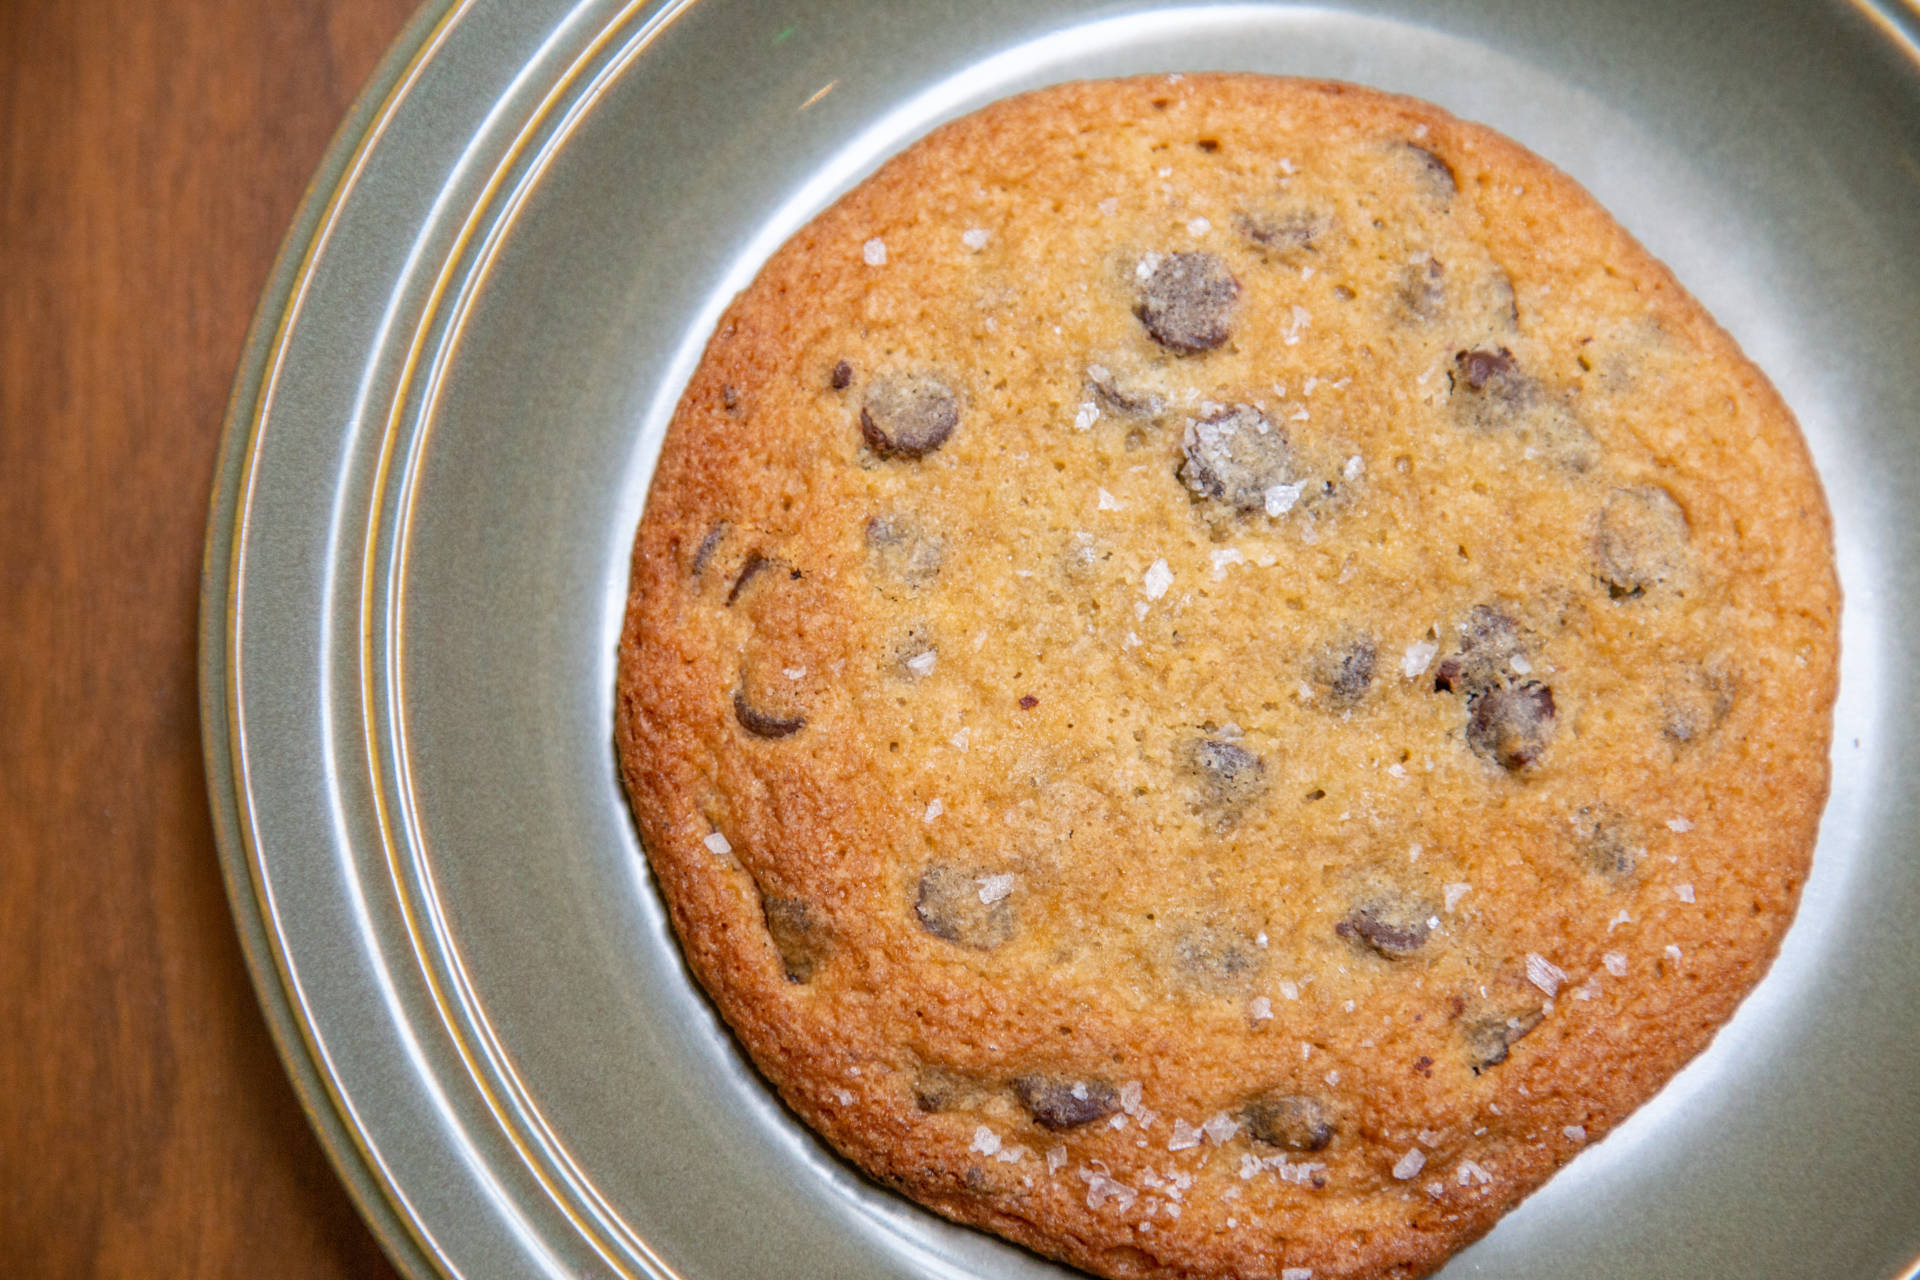 Provender's chocolate chip cookie.